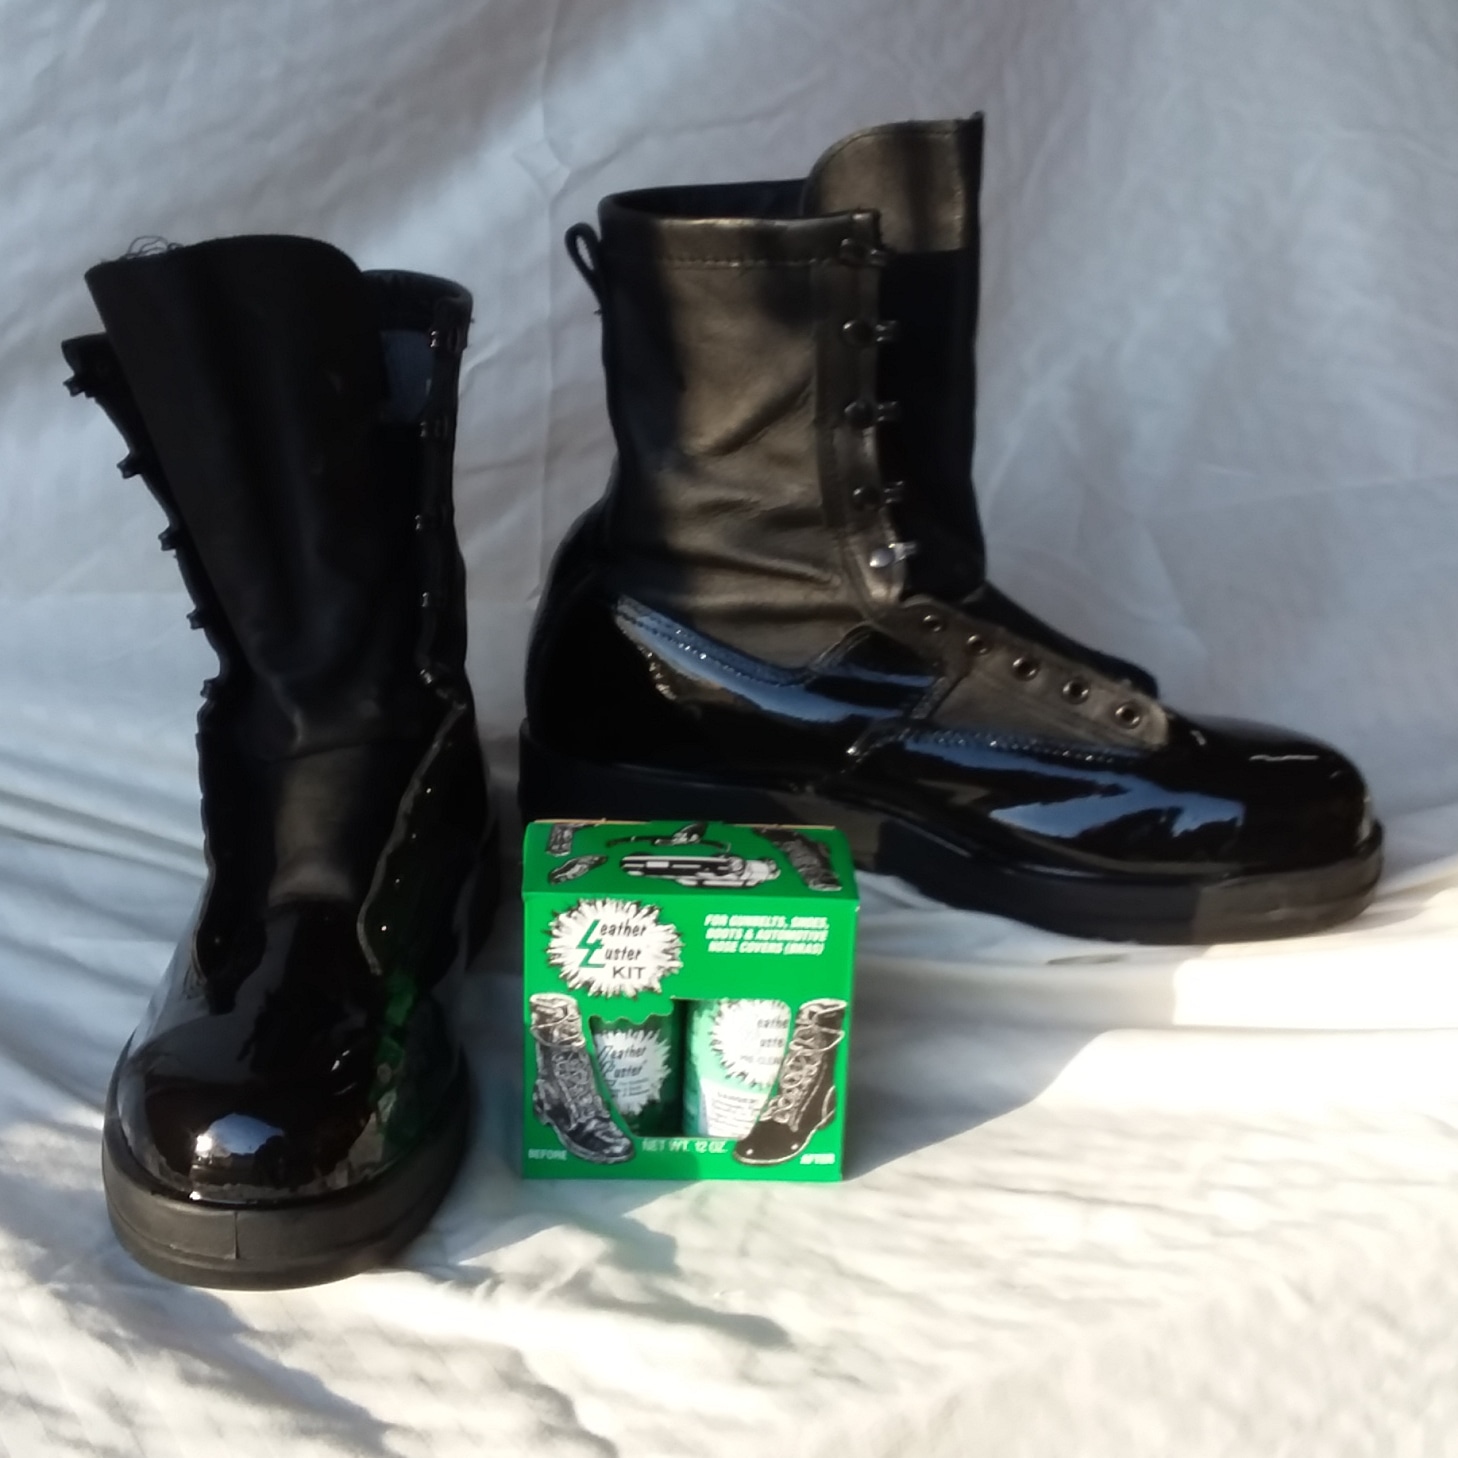 Leather Luster - Bring your favorite pair of old boots back to